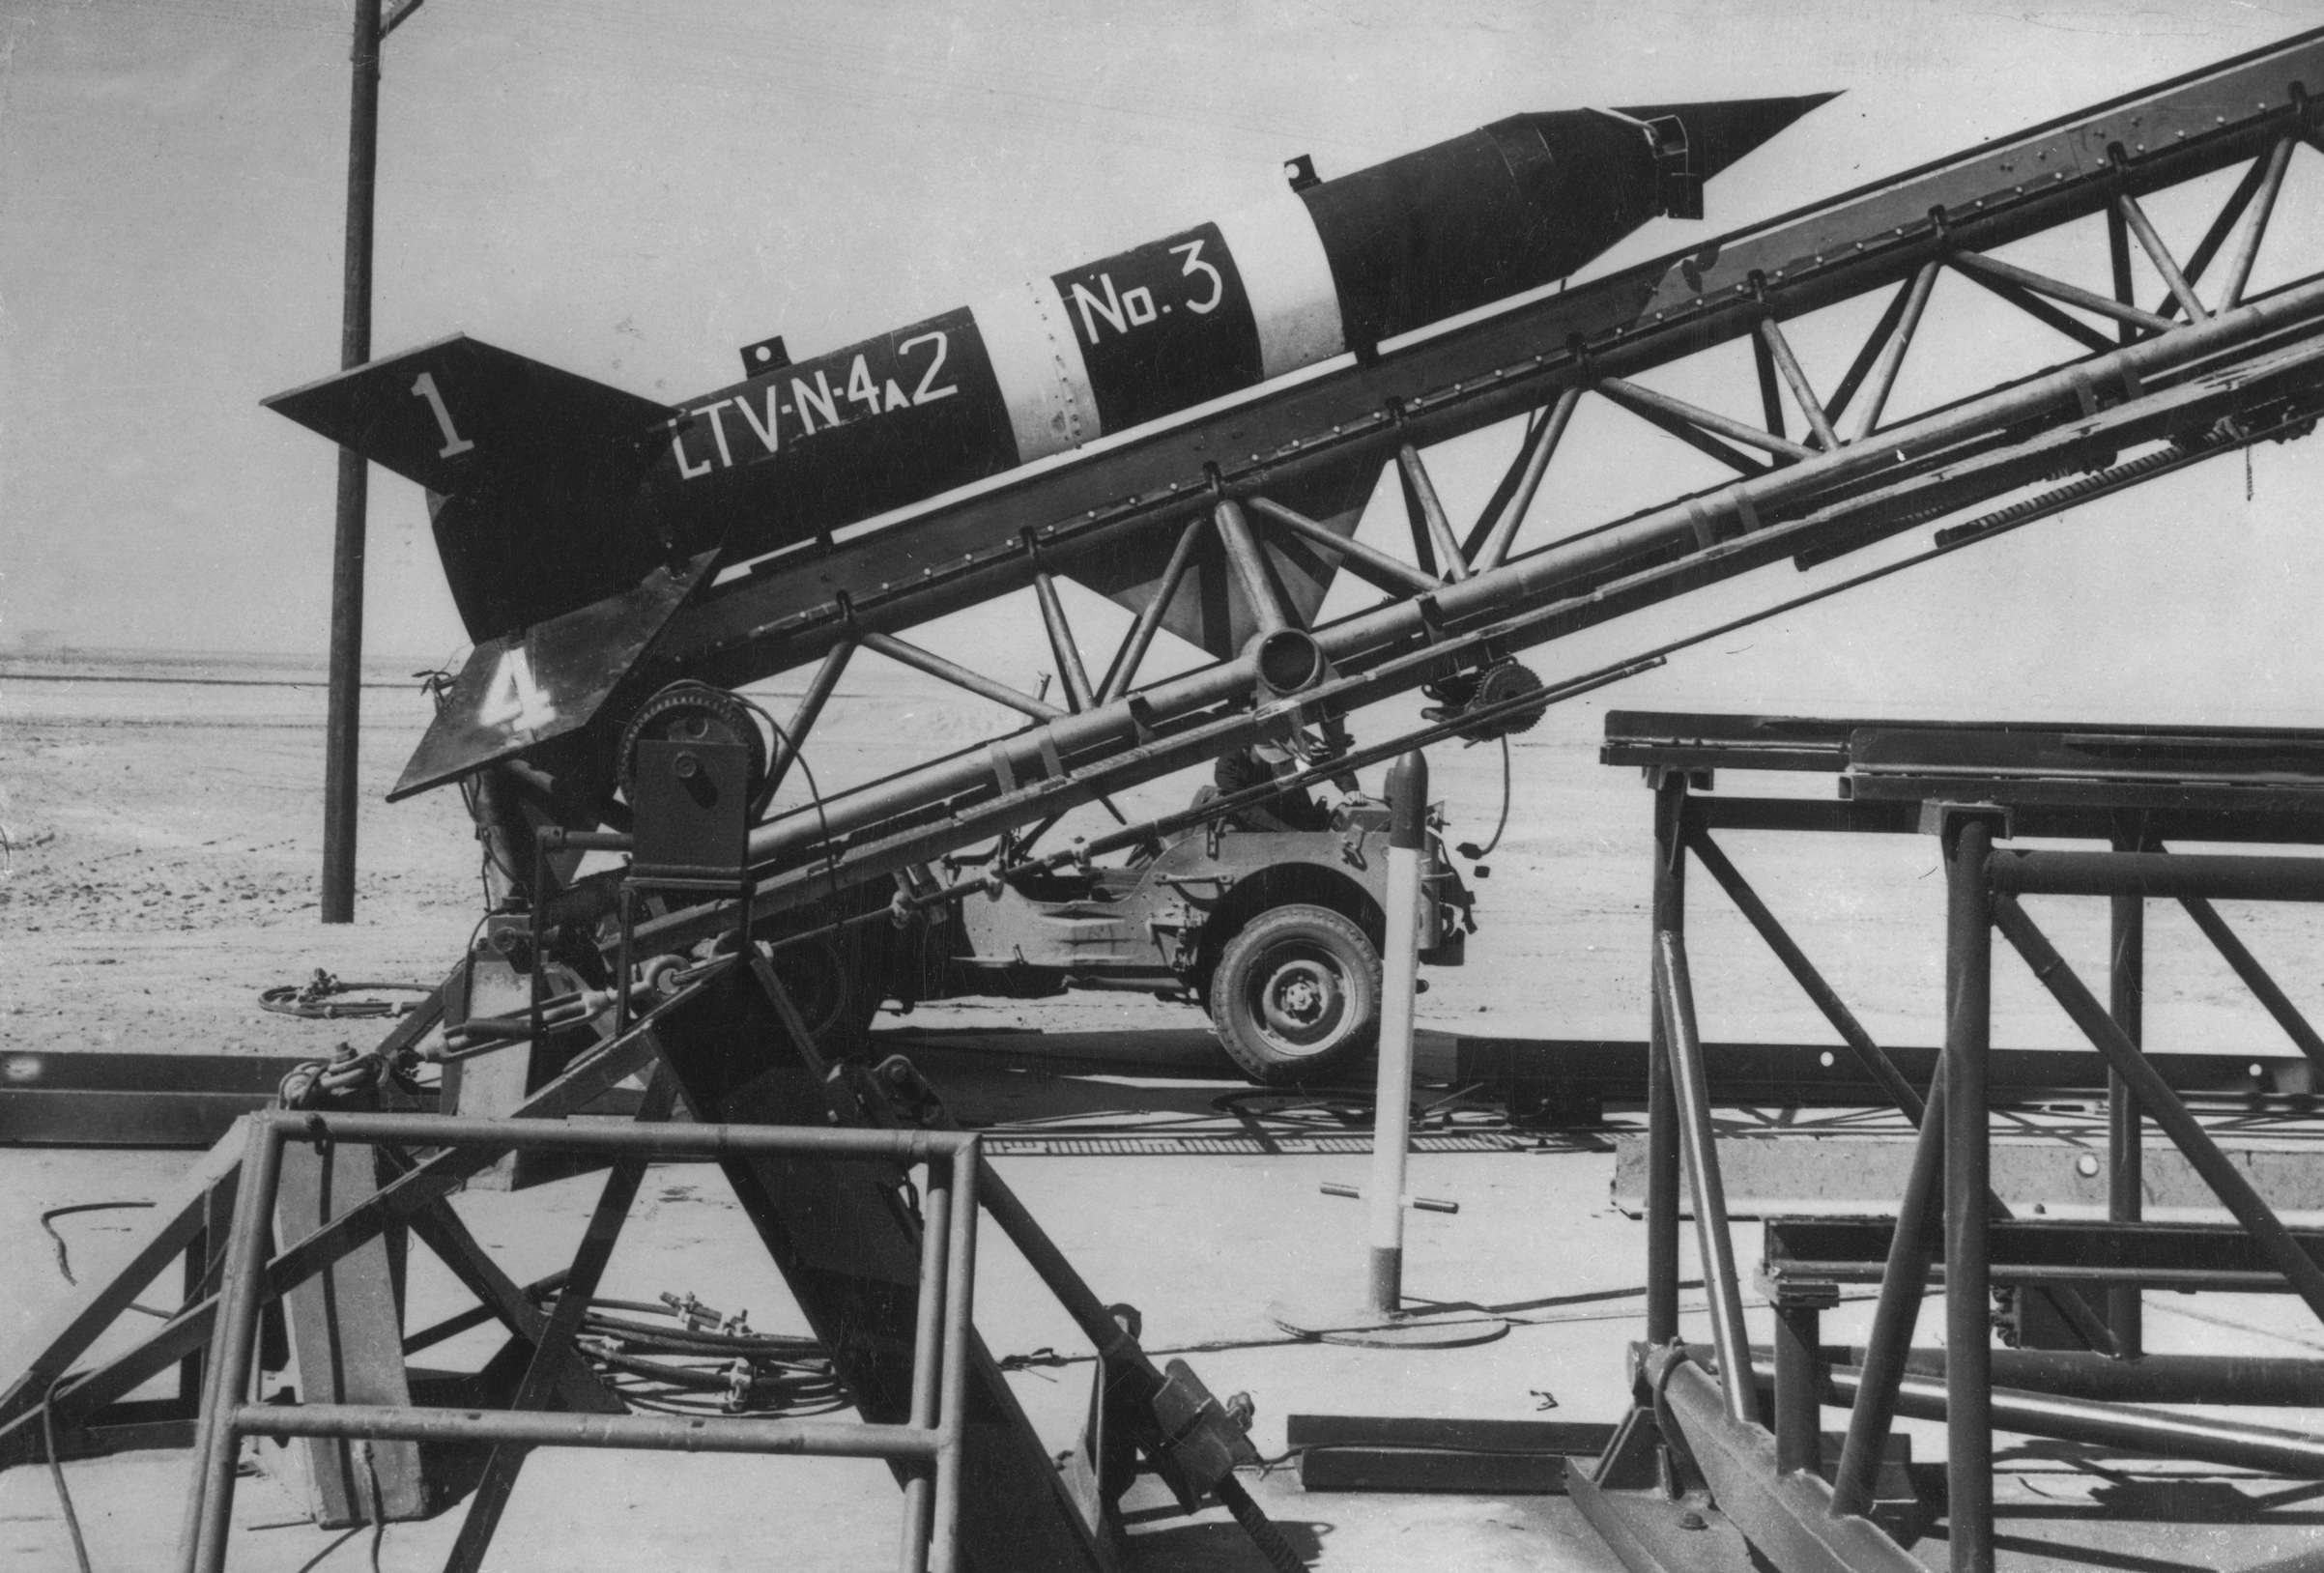 A newly-developed  rocket on a launching ramp at the Naval Ordnance Test Station at China Lake, Calif., Feb. 12, 1949. (Keystone/Getty Images)